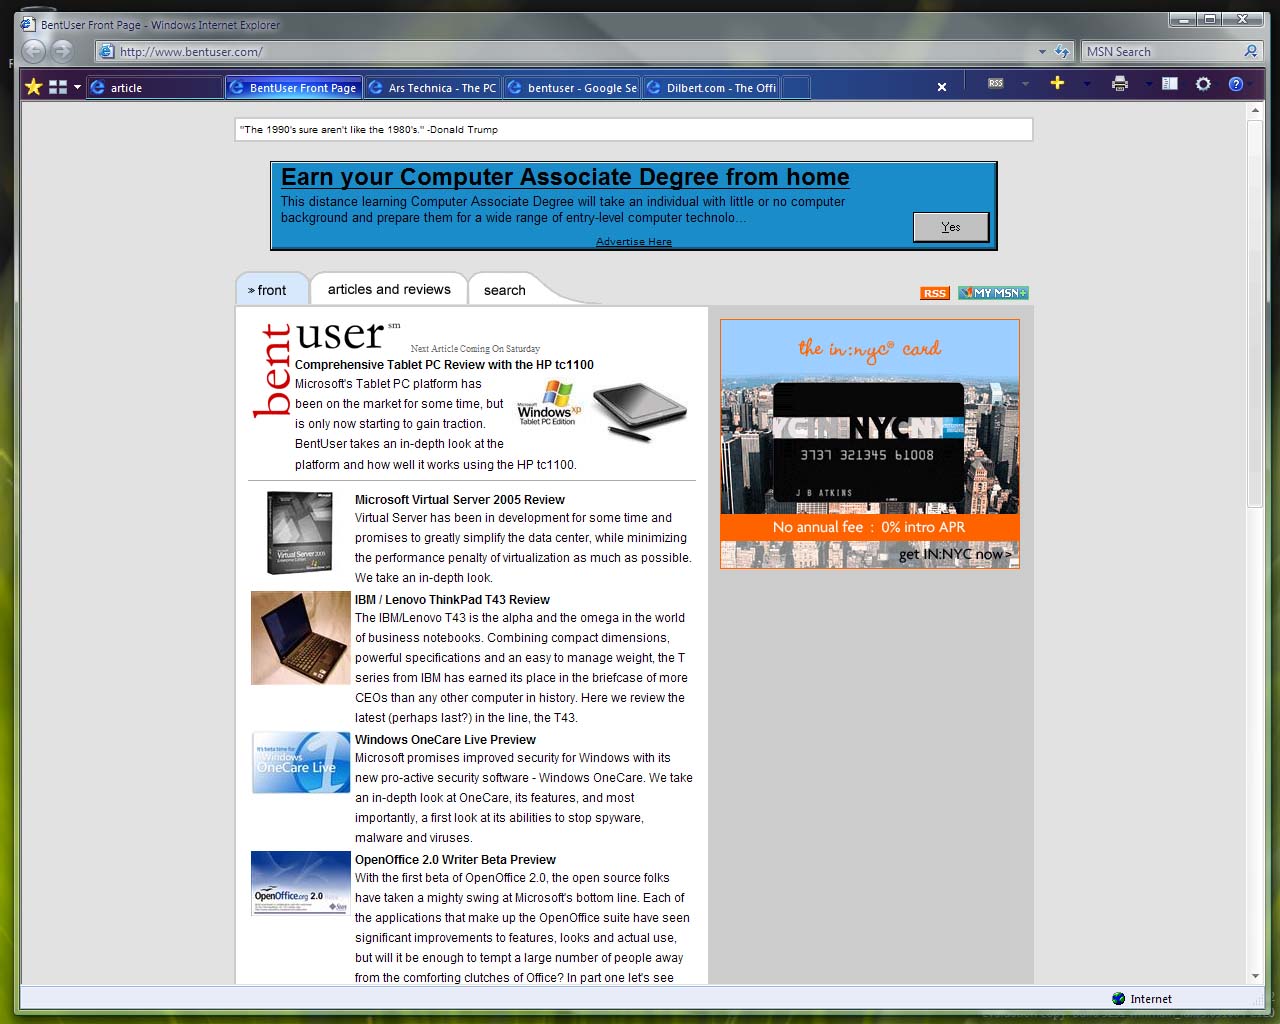 IE7 on Vista: Less features more ugly